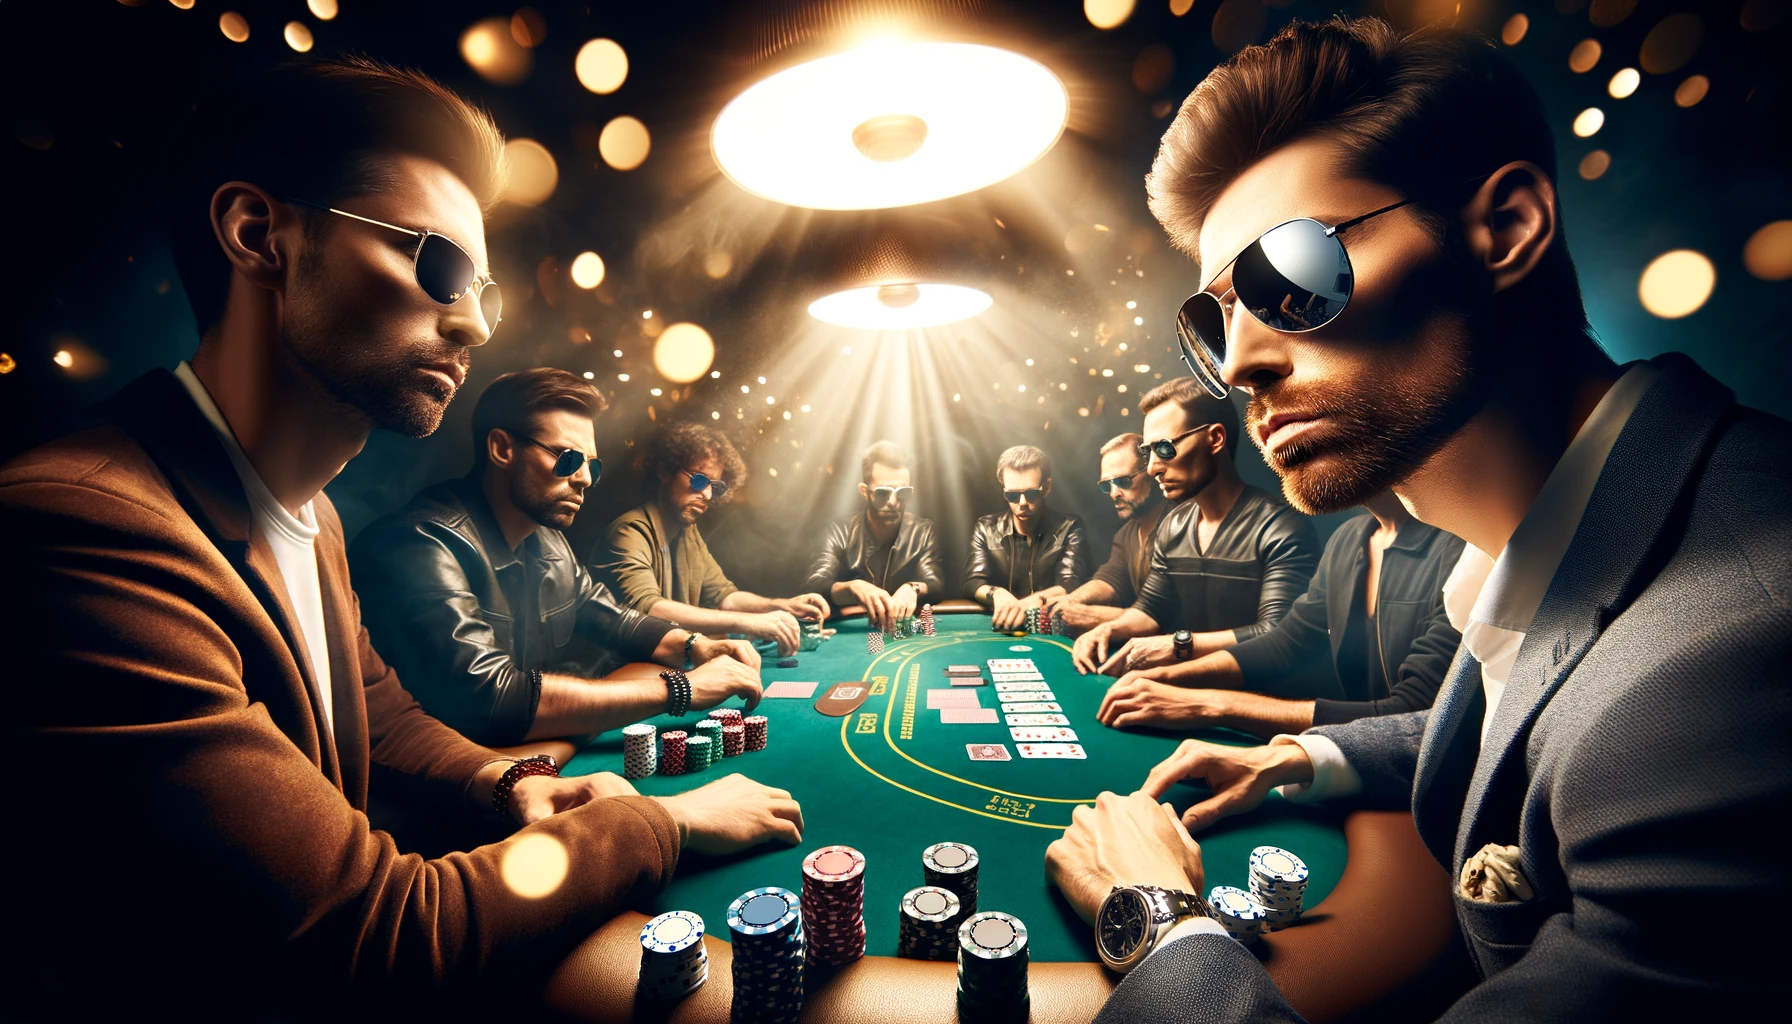 Sunglasses at the Poker Table